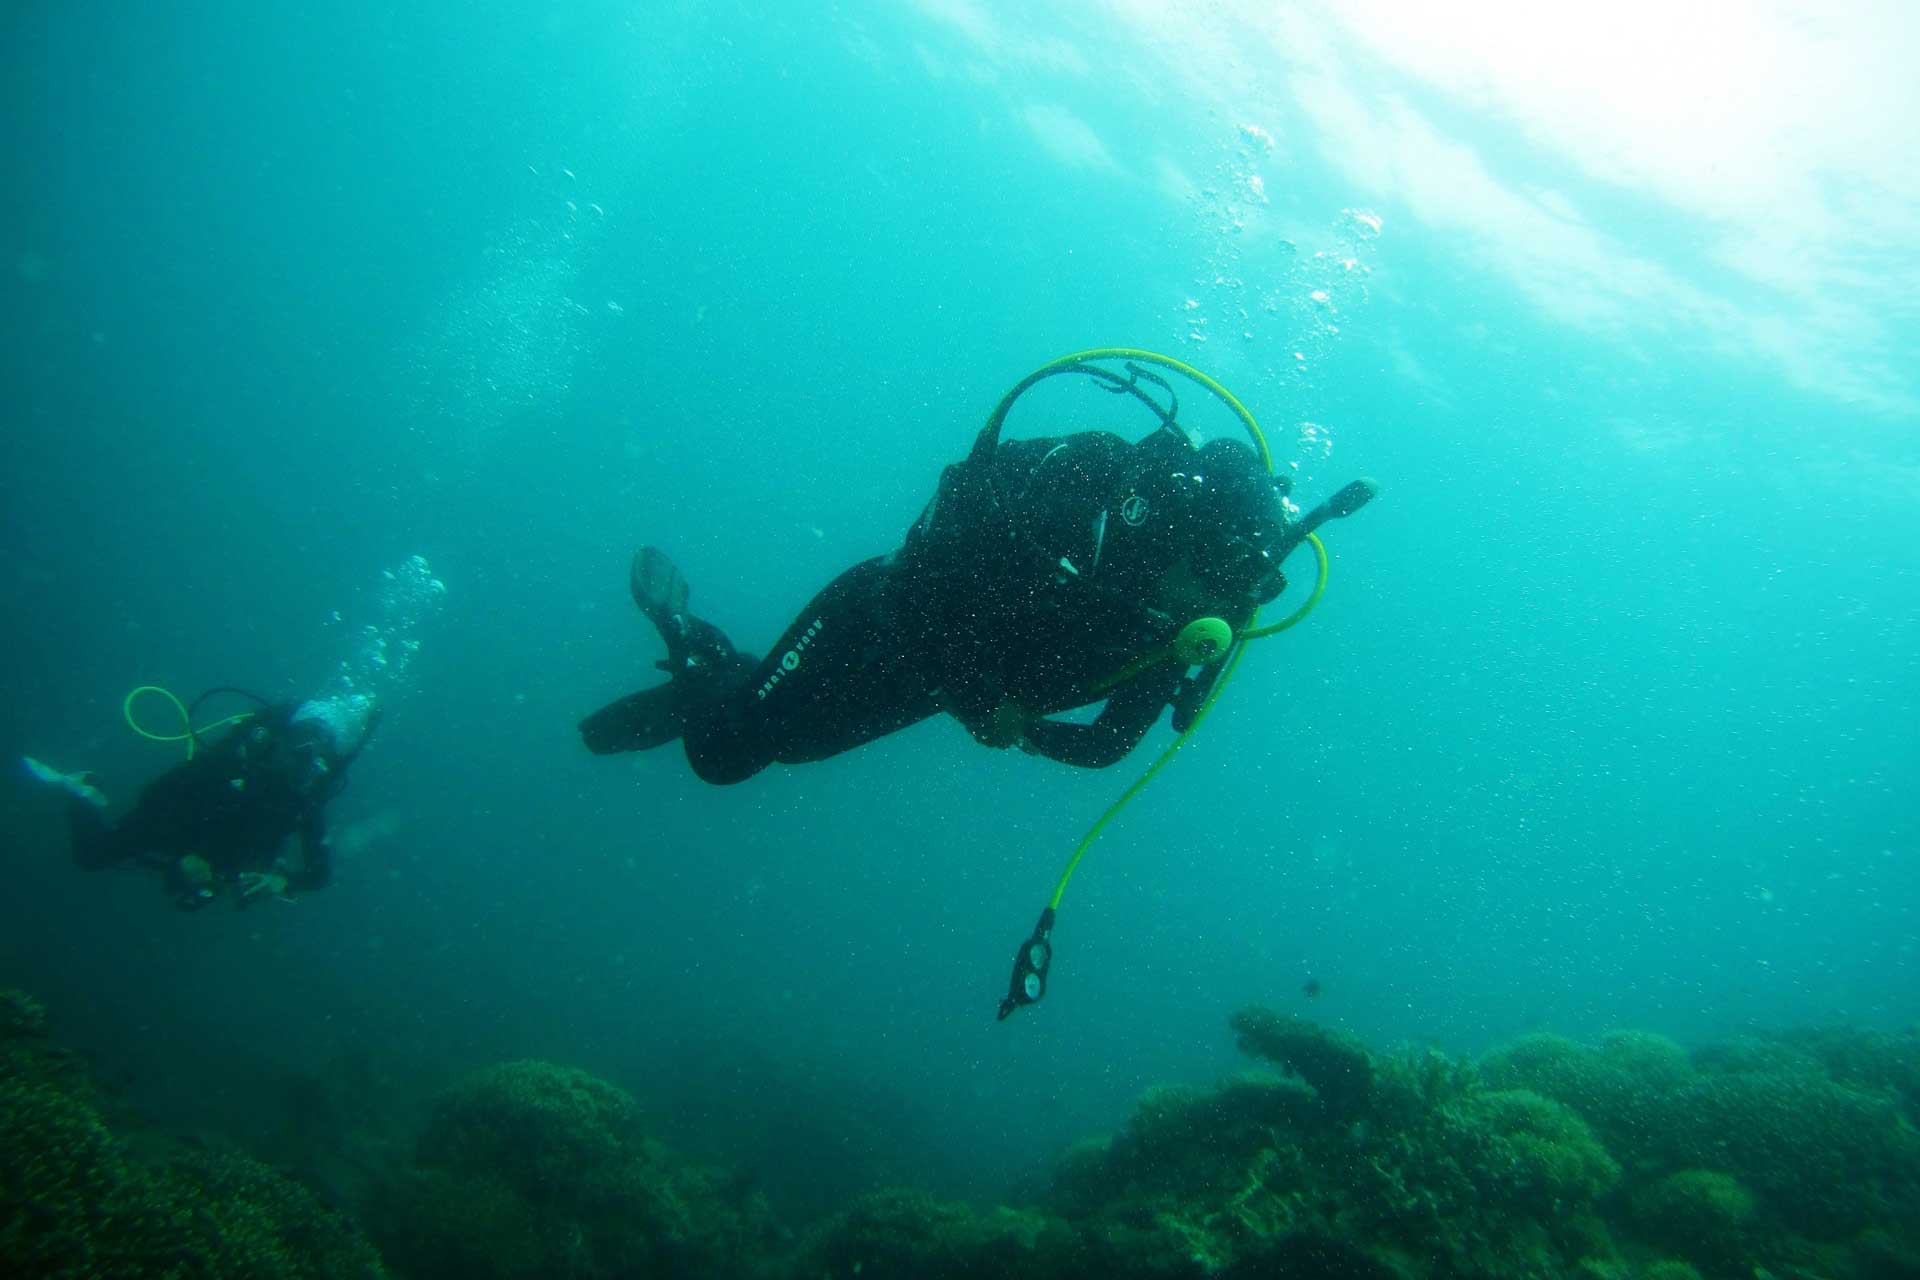 Two divers diving off the coast of Puri Bagus Candidasa